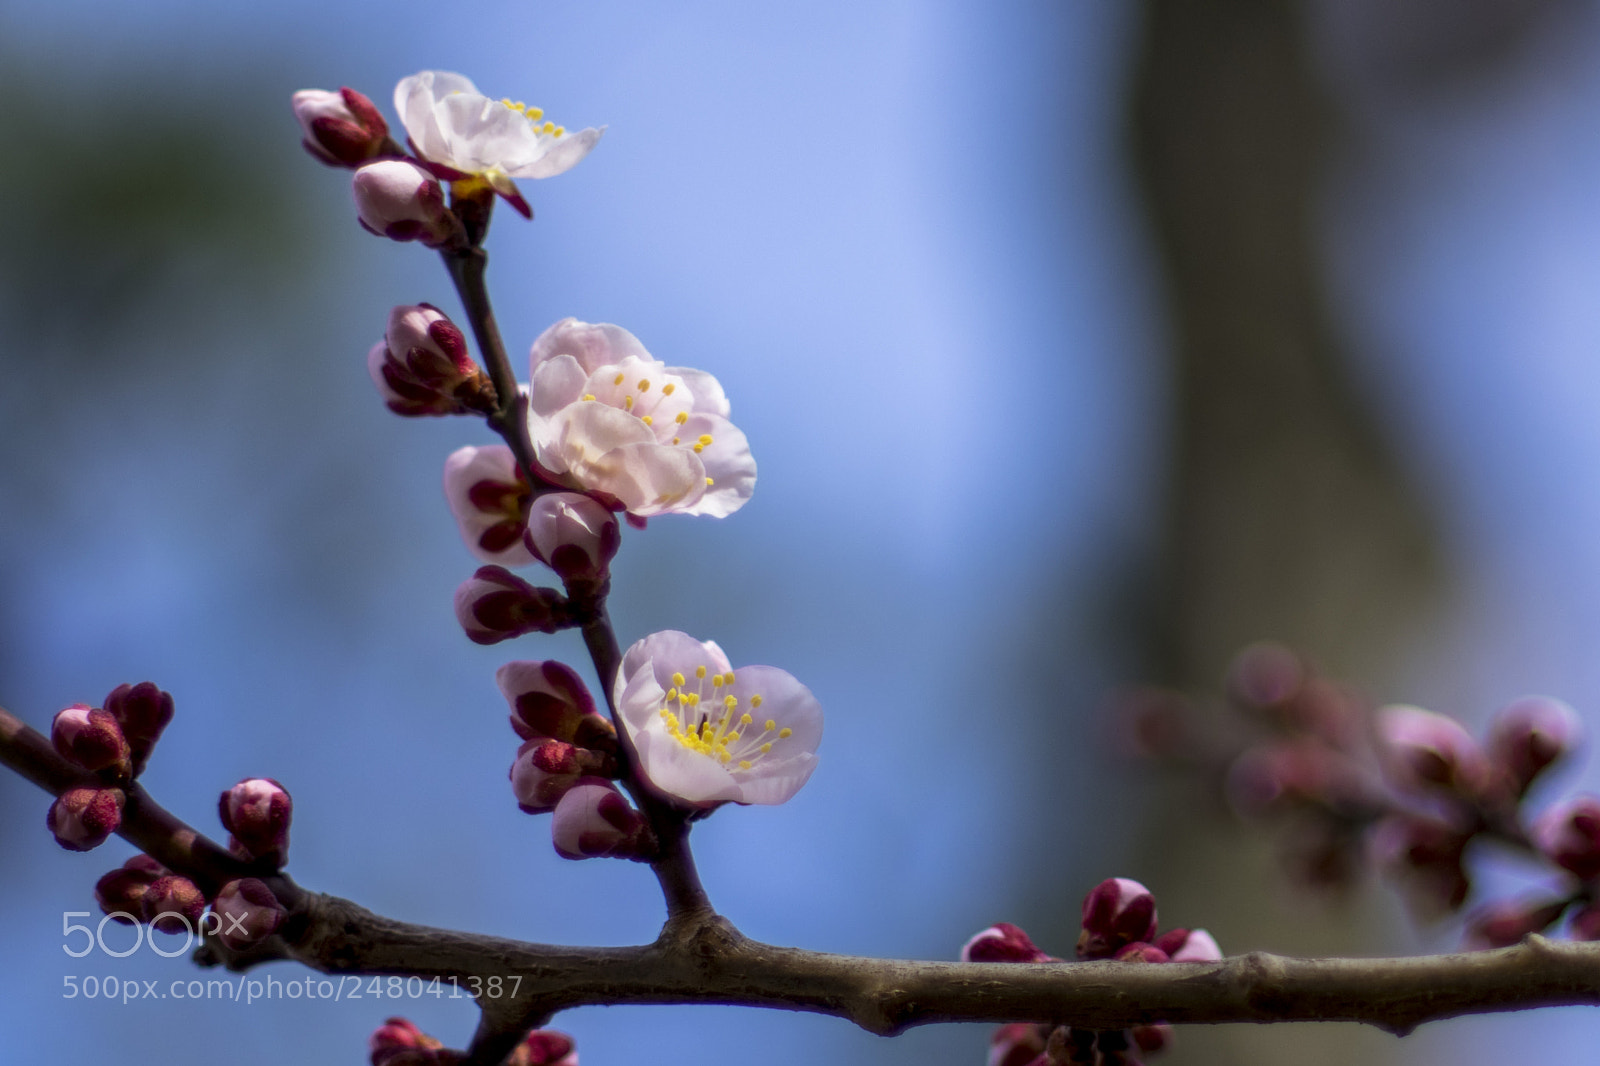 Pentax K-3 sample photo. Breath of spring photography